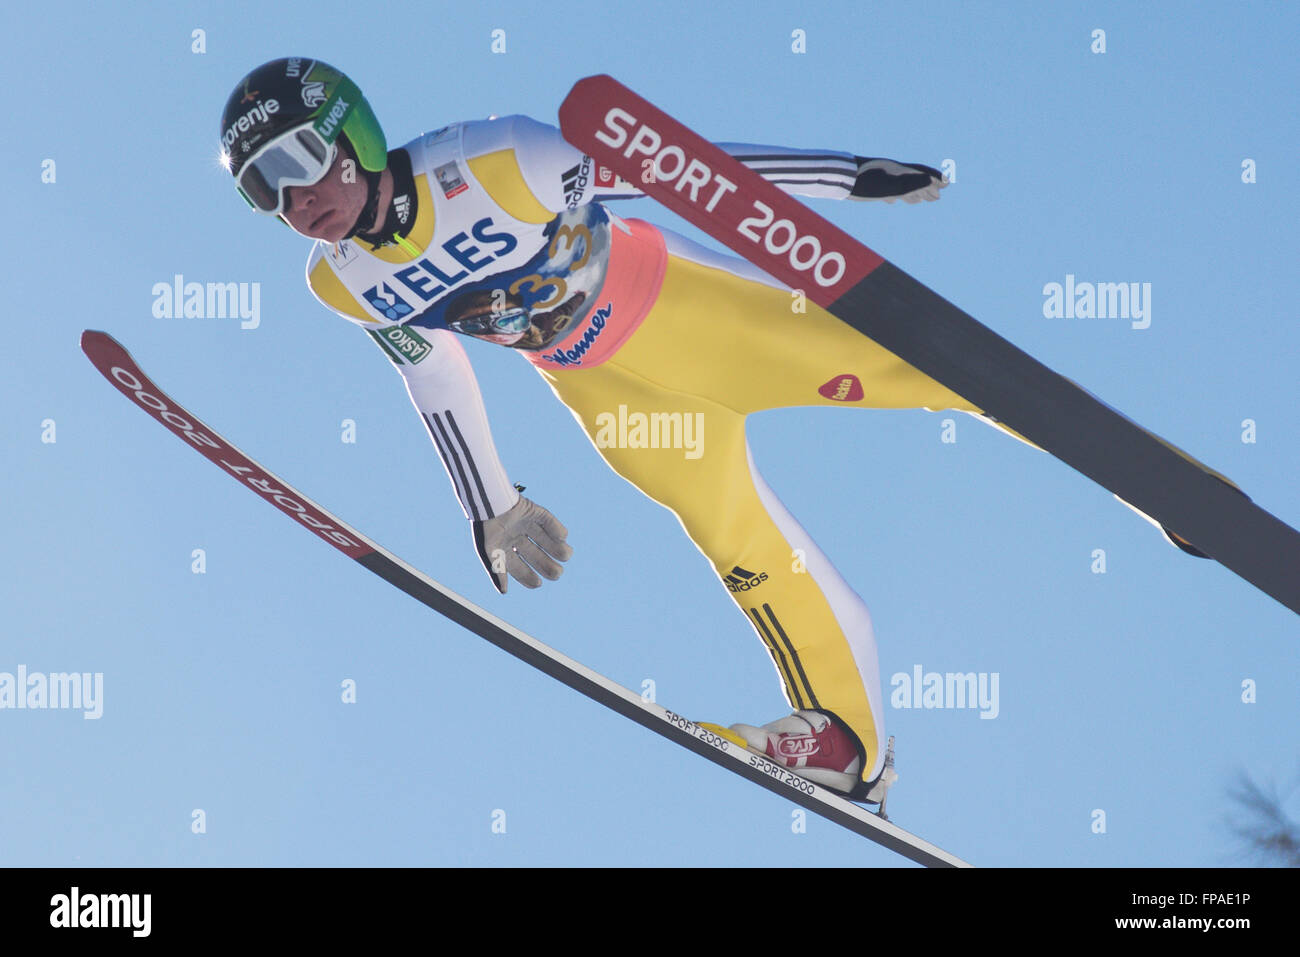 Planica, Slovenia. 18th Mar, 2016. Anze Lenisek of Slovenia competes during Planica FIS Ski Jumping World Cup finals on the March 18, 2016 in Planica, Slovenia. © Rok Rakun/Pacific Press/Alamy Live News Stock Photo